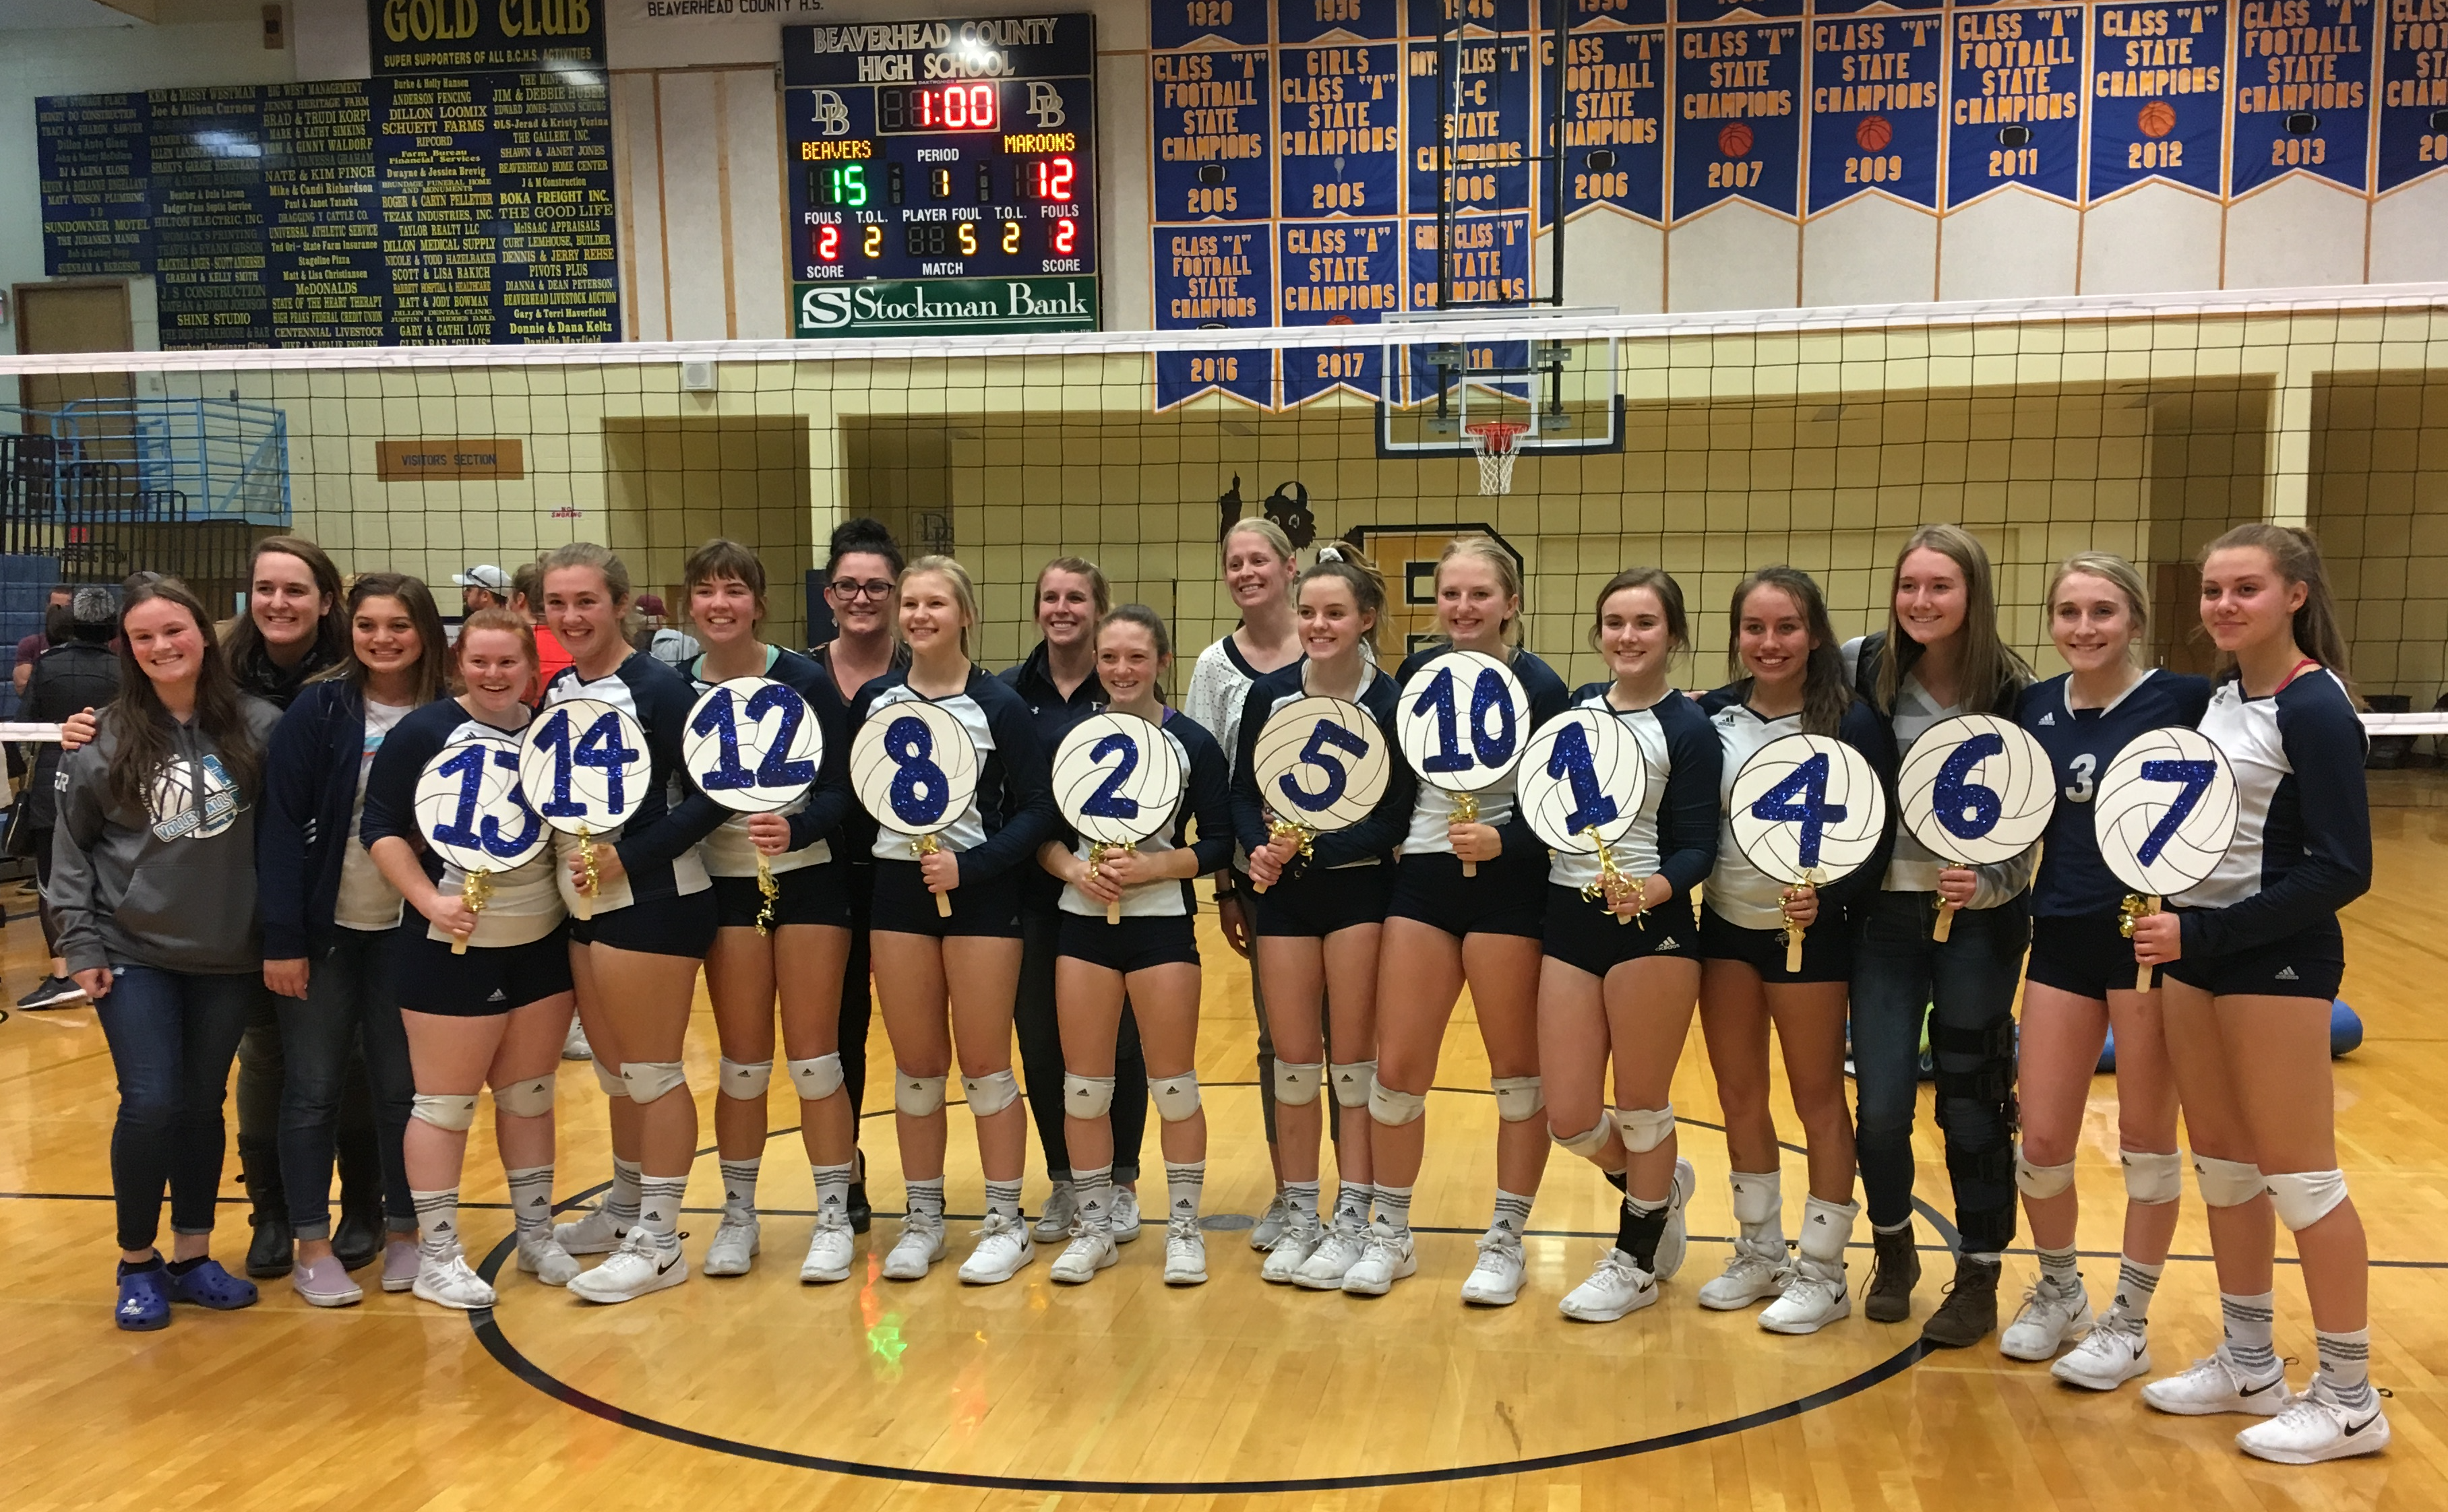 A photo of the Varsity volleyball team celebrating their third place finish at Districts in October 2019